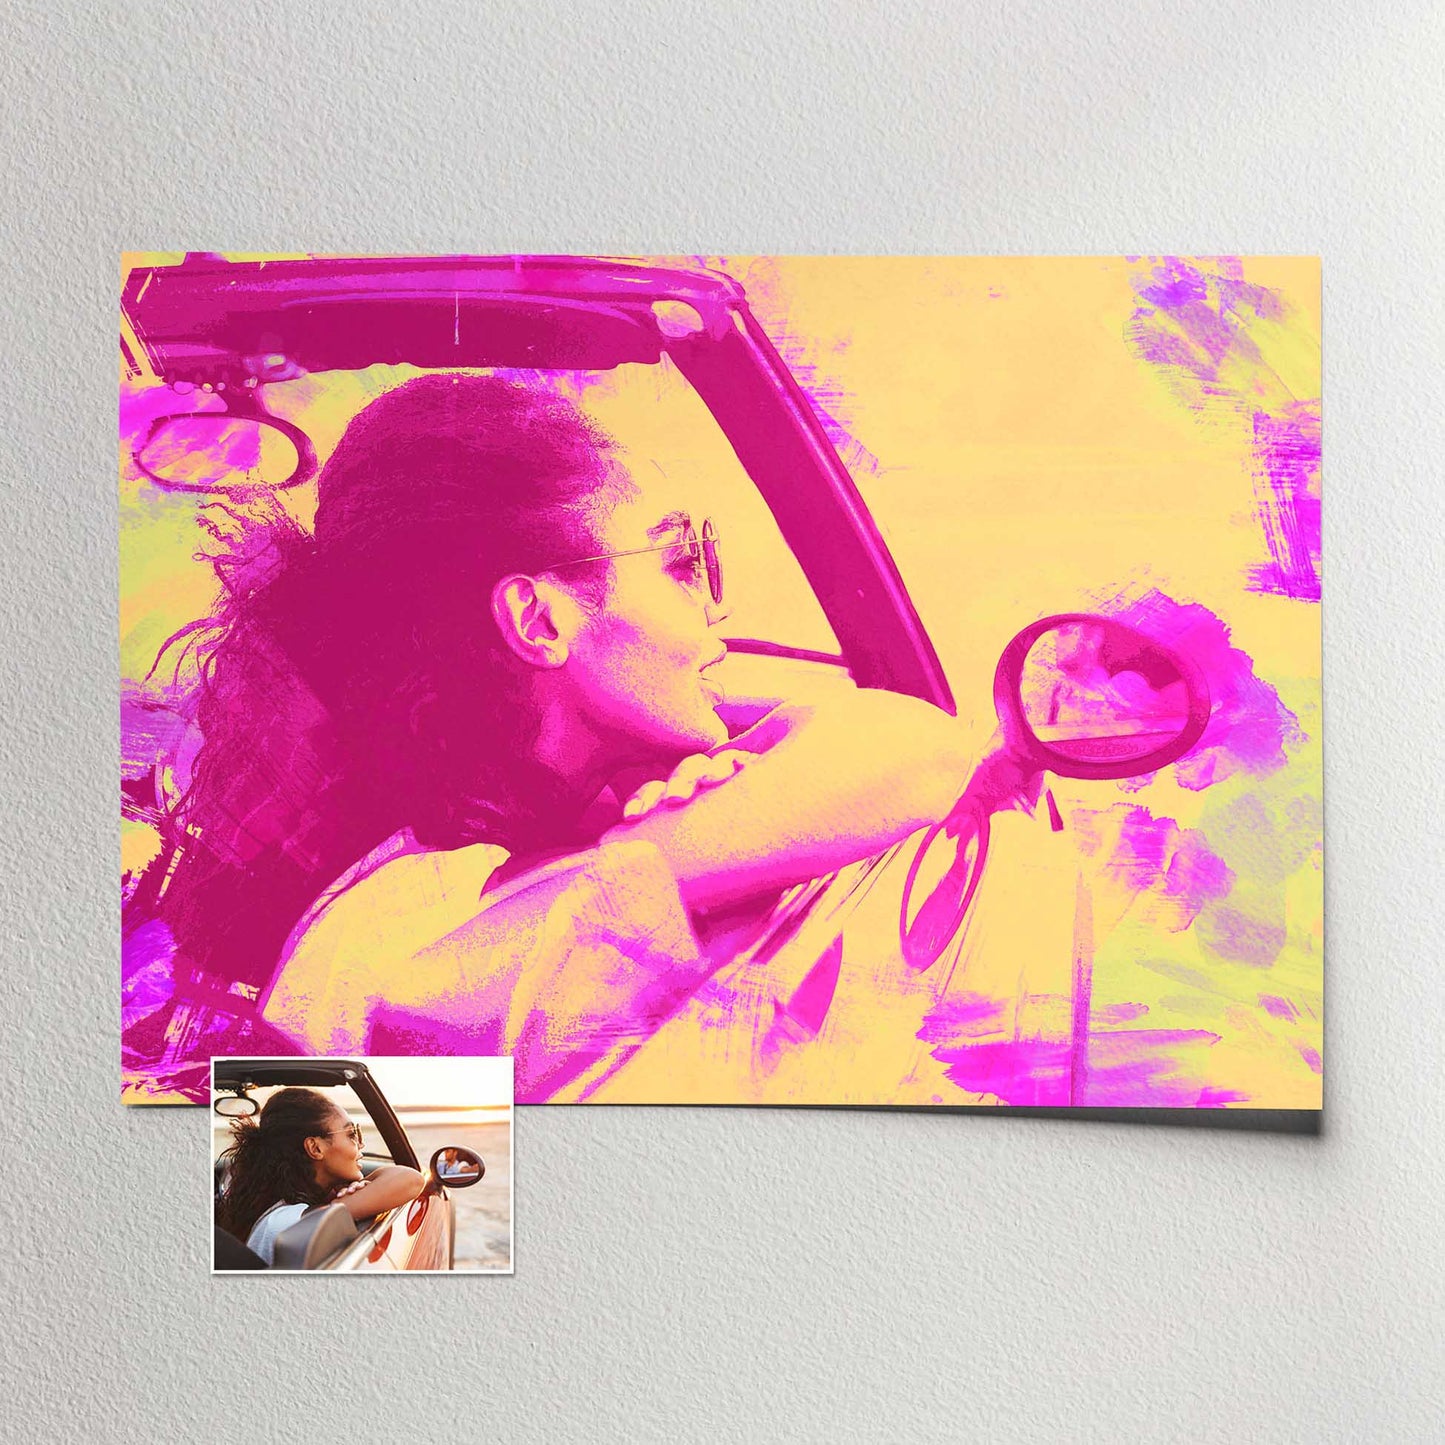 Experience the beauty of our Personalised Pink & Yellow Watercolor Print, created from your photo using a realistic traditional watercolor style. The combination of pink and yellow hues creates a fun and exciting visual impact